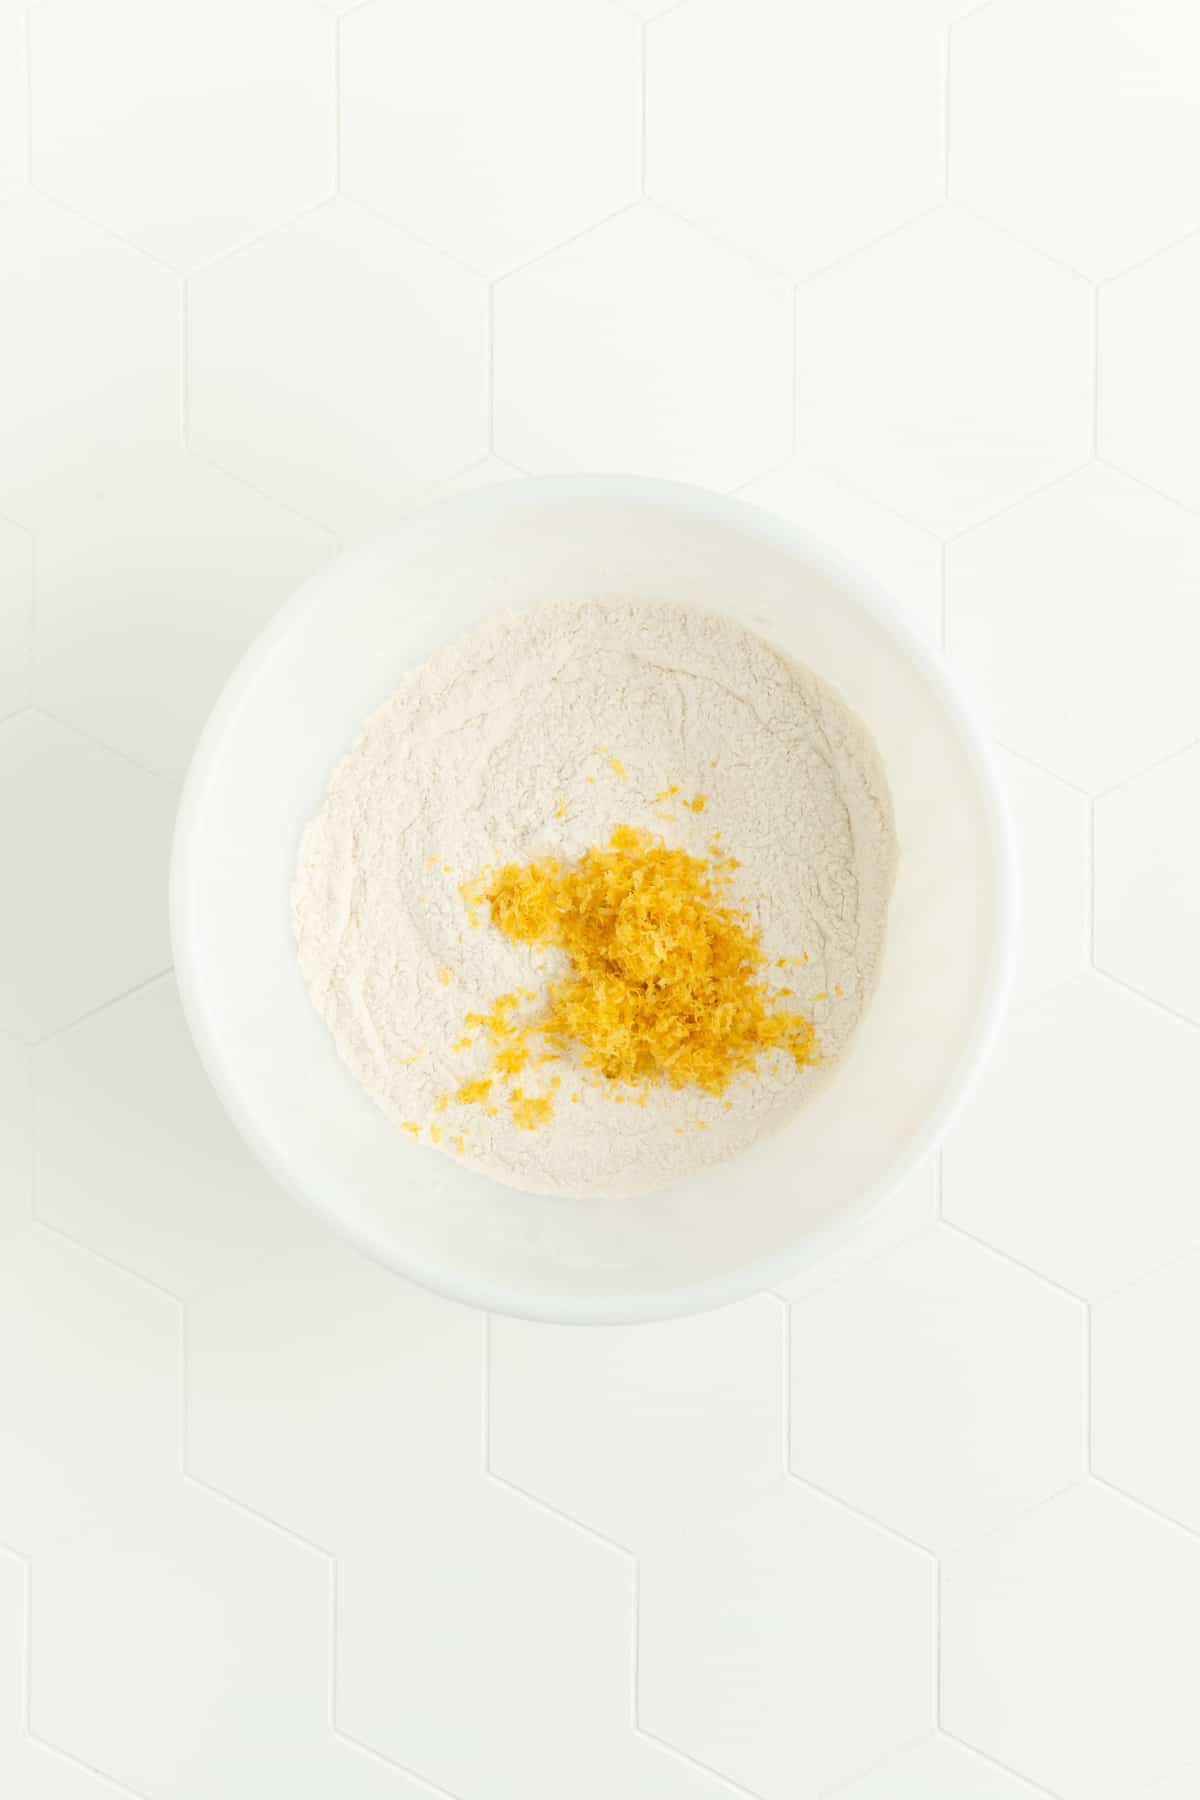 Dry ingredients and lemon zest for lemon pancakes in white mixing bowl.